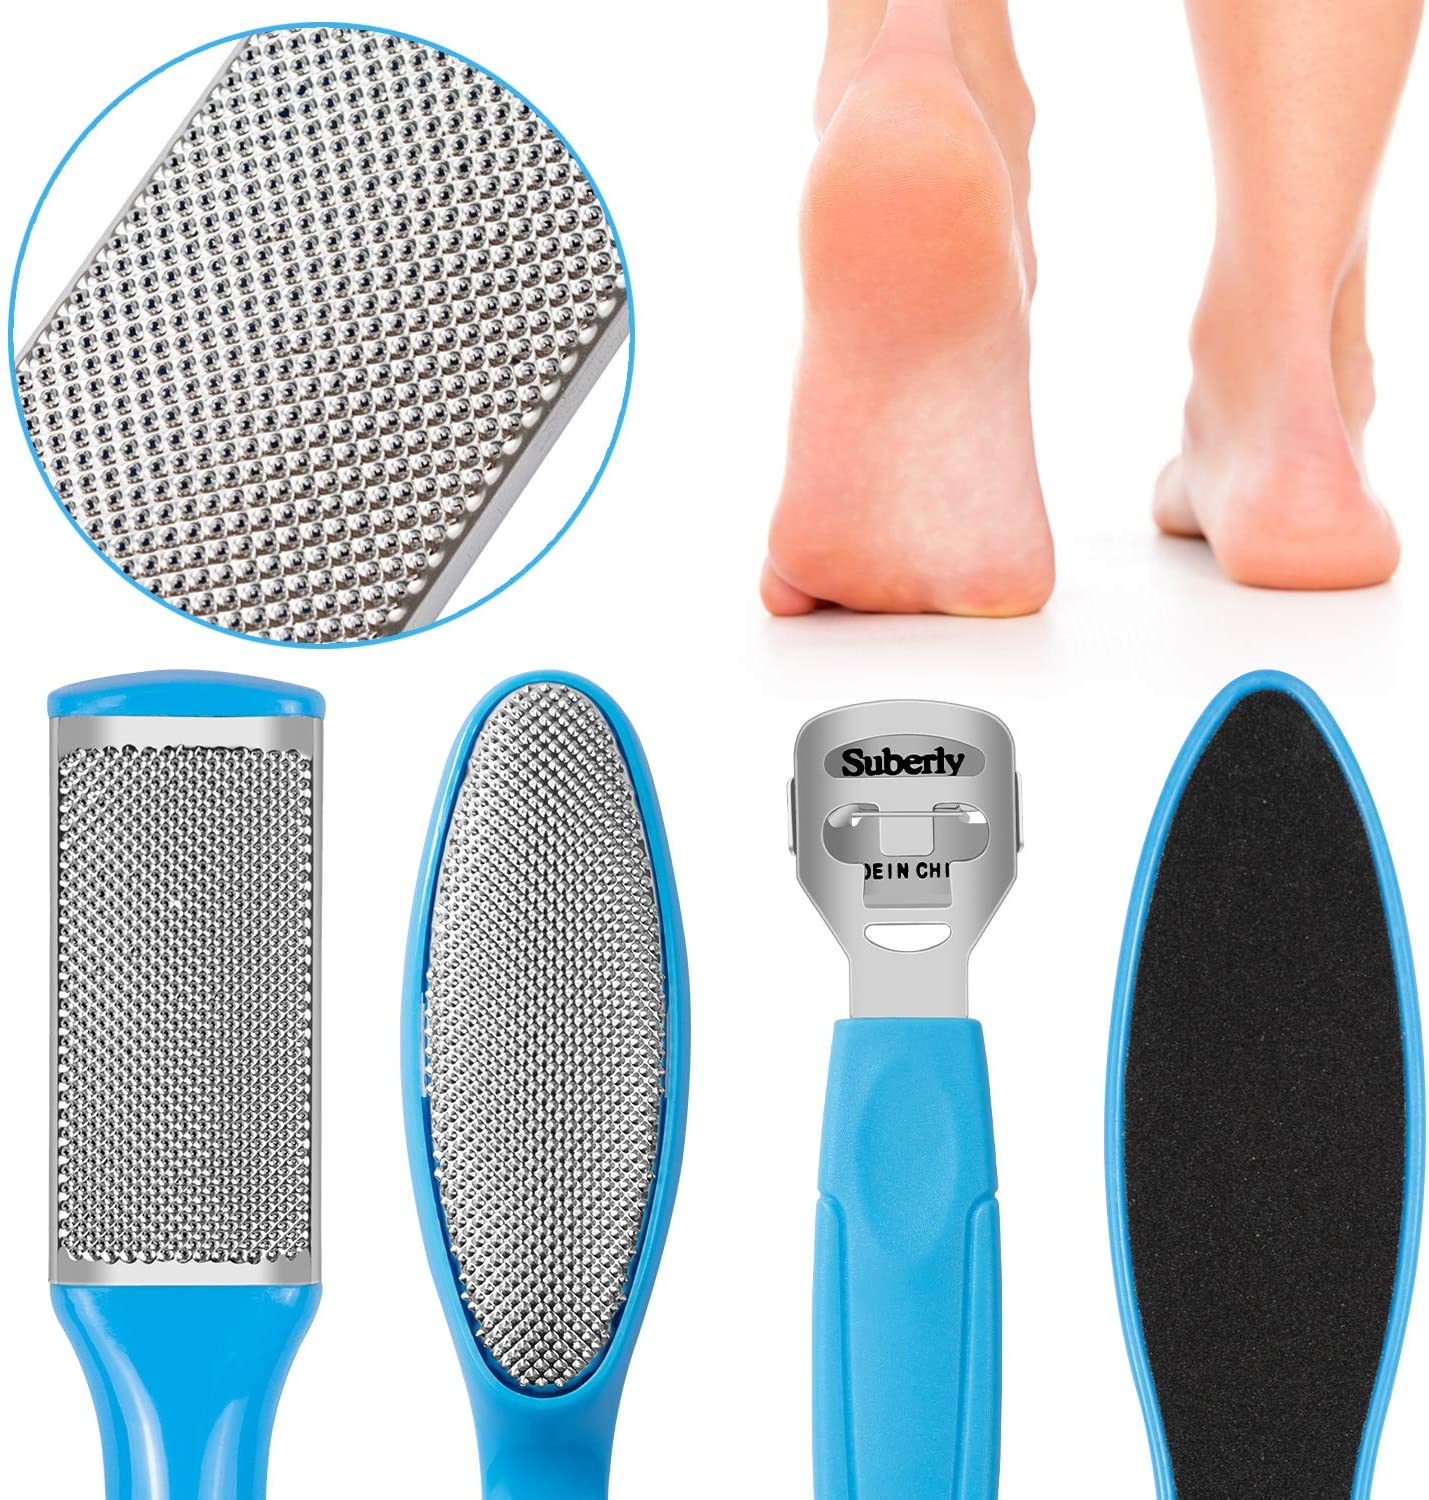 MFW Pedicure Kit 20 in 1, Professional Pedicure Tools Set Stainless Steel Foot Files Callus Remover Foot Rasp Scrubber Dead Skin Remover Pedicure Spa Kits for Women Men Foot Care at Home and Salon